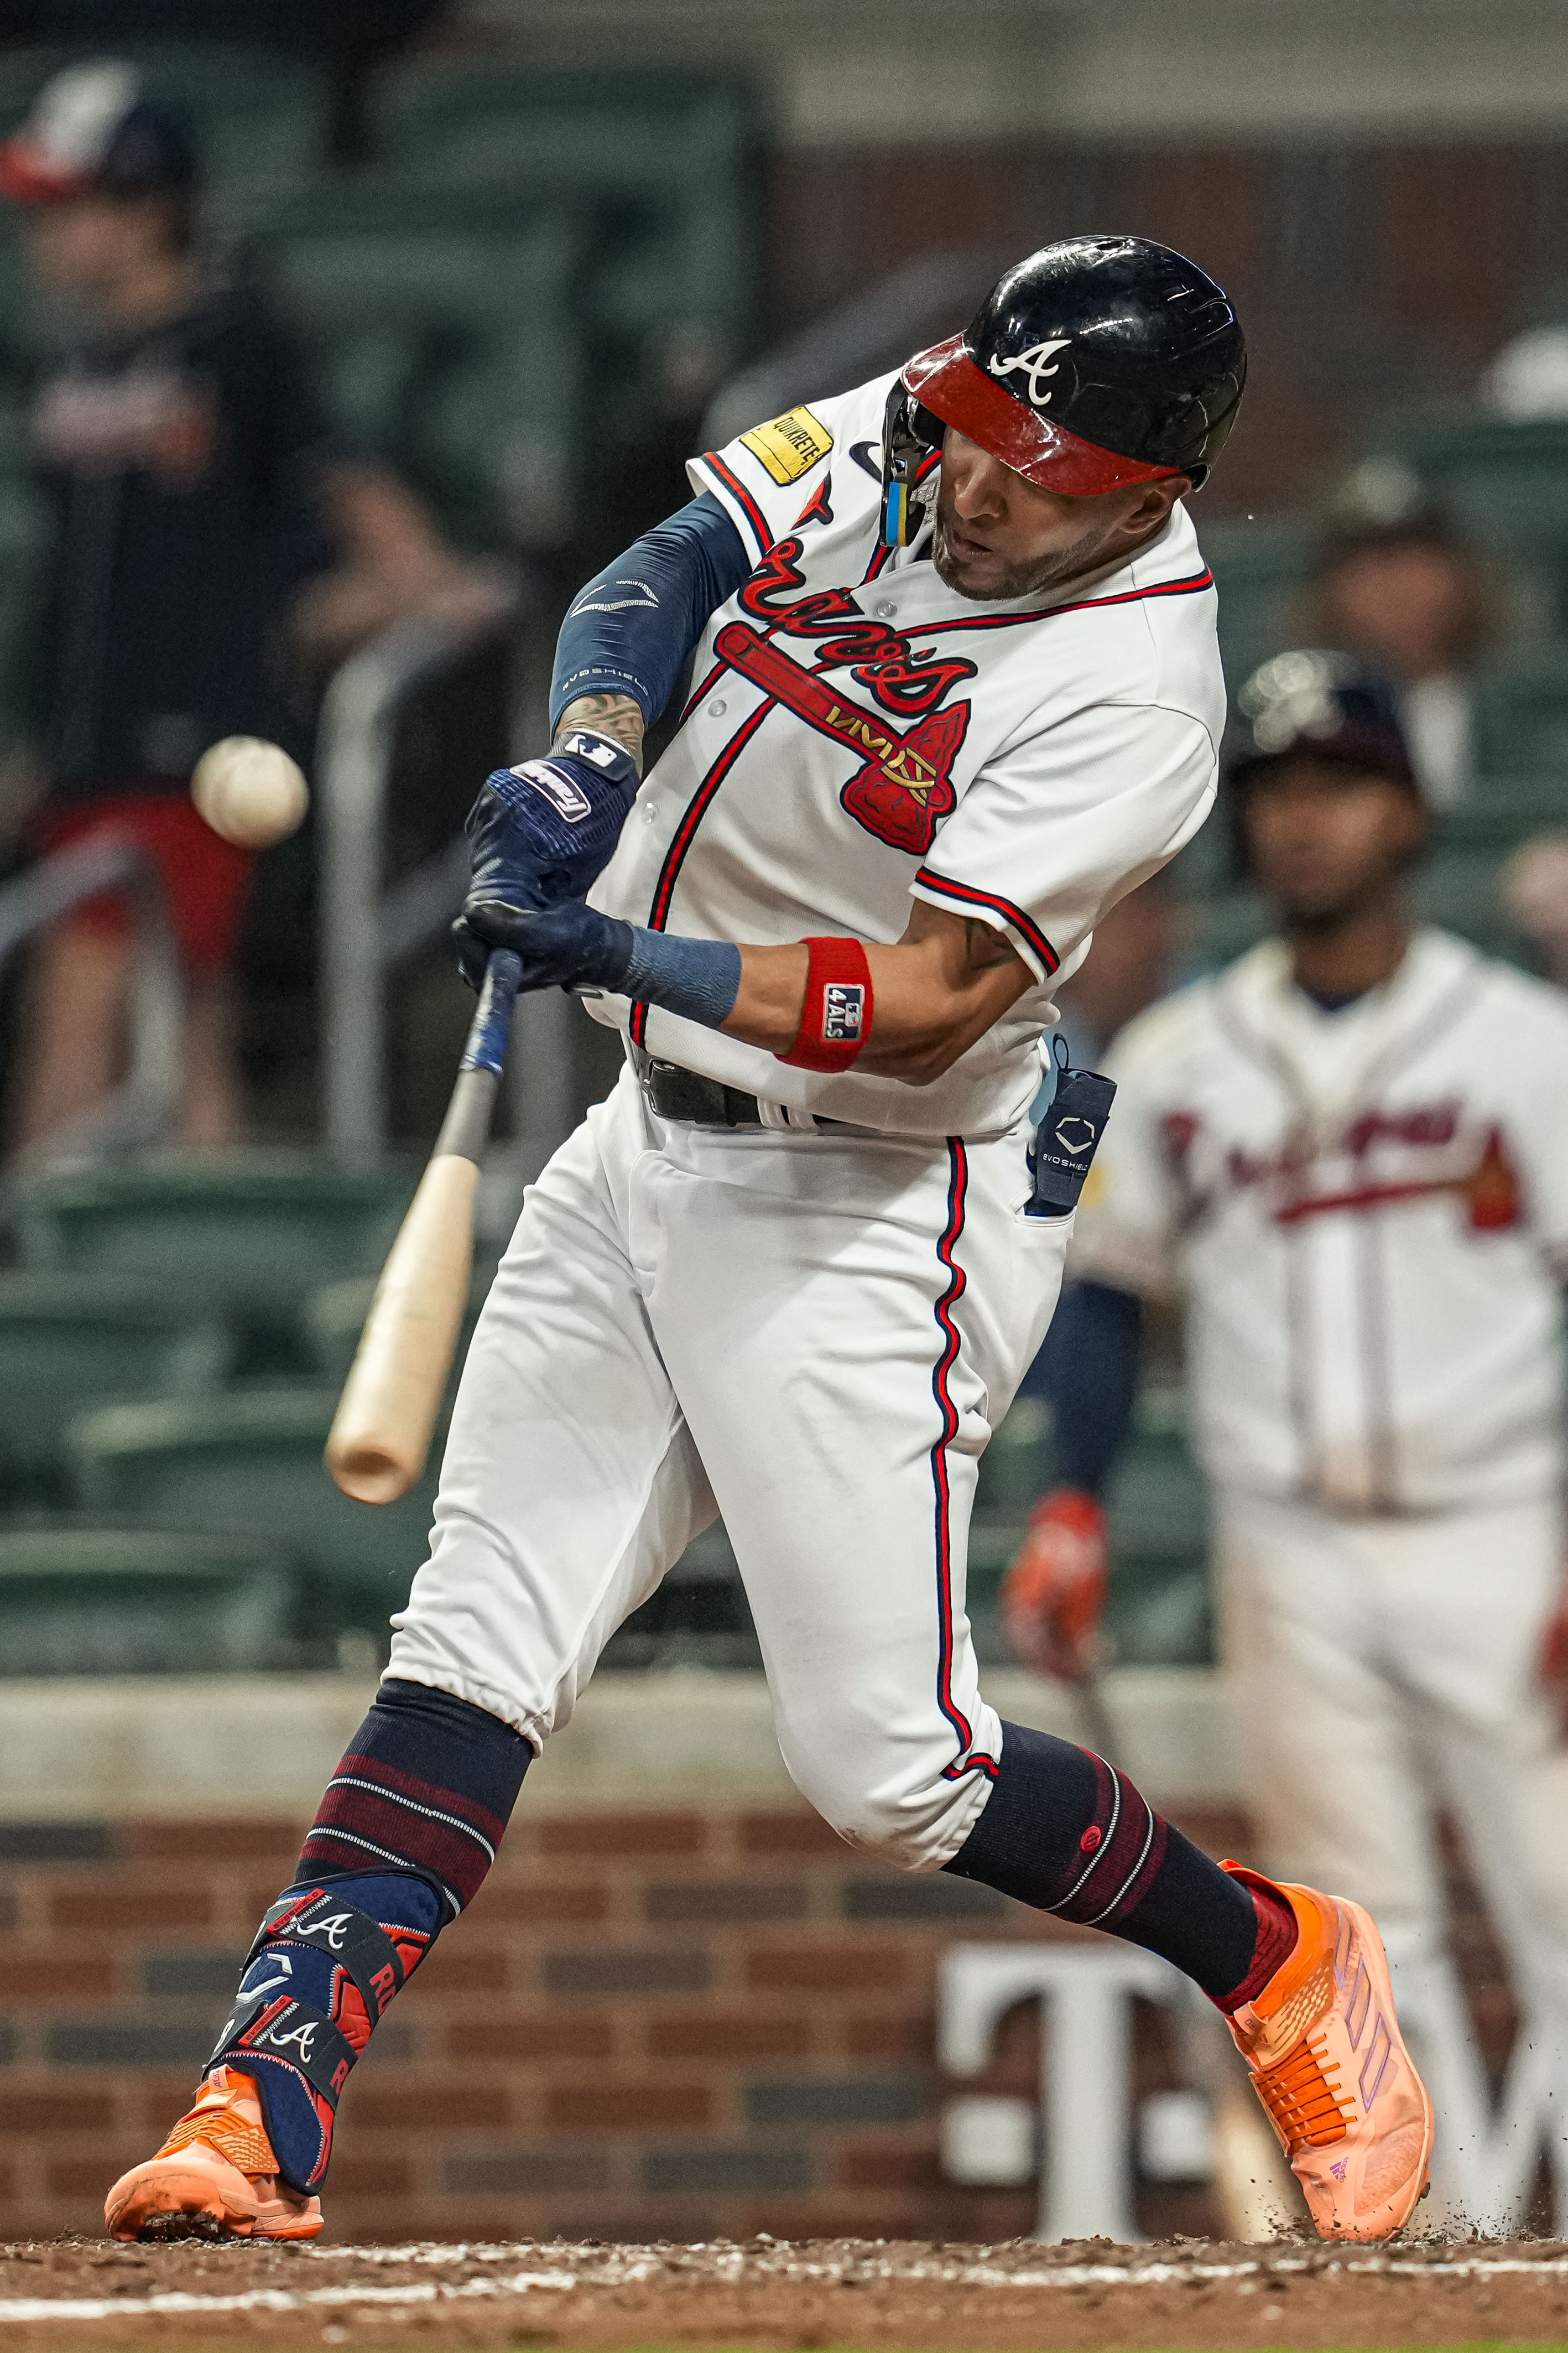 Four-run sixth inning sends Braves past Mets